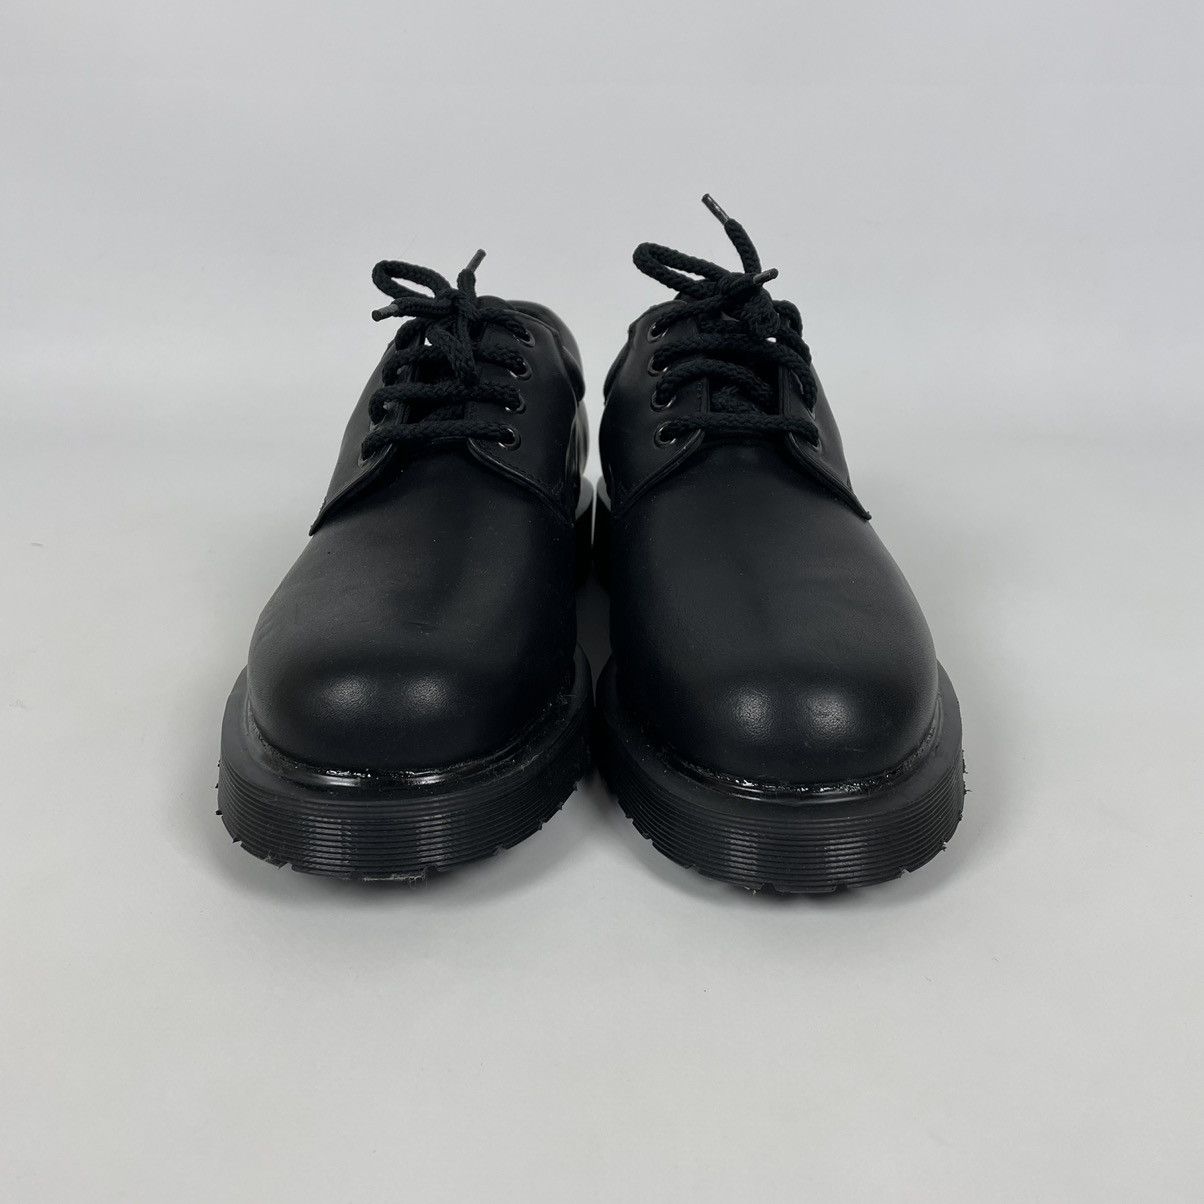 Dr. Martens Vintage Dr. Martens Royal Mail Shoes Made in England Size US 9 / EU 42 - 3 Thumbnail